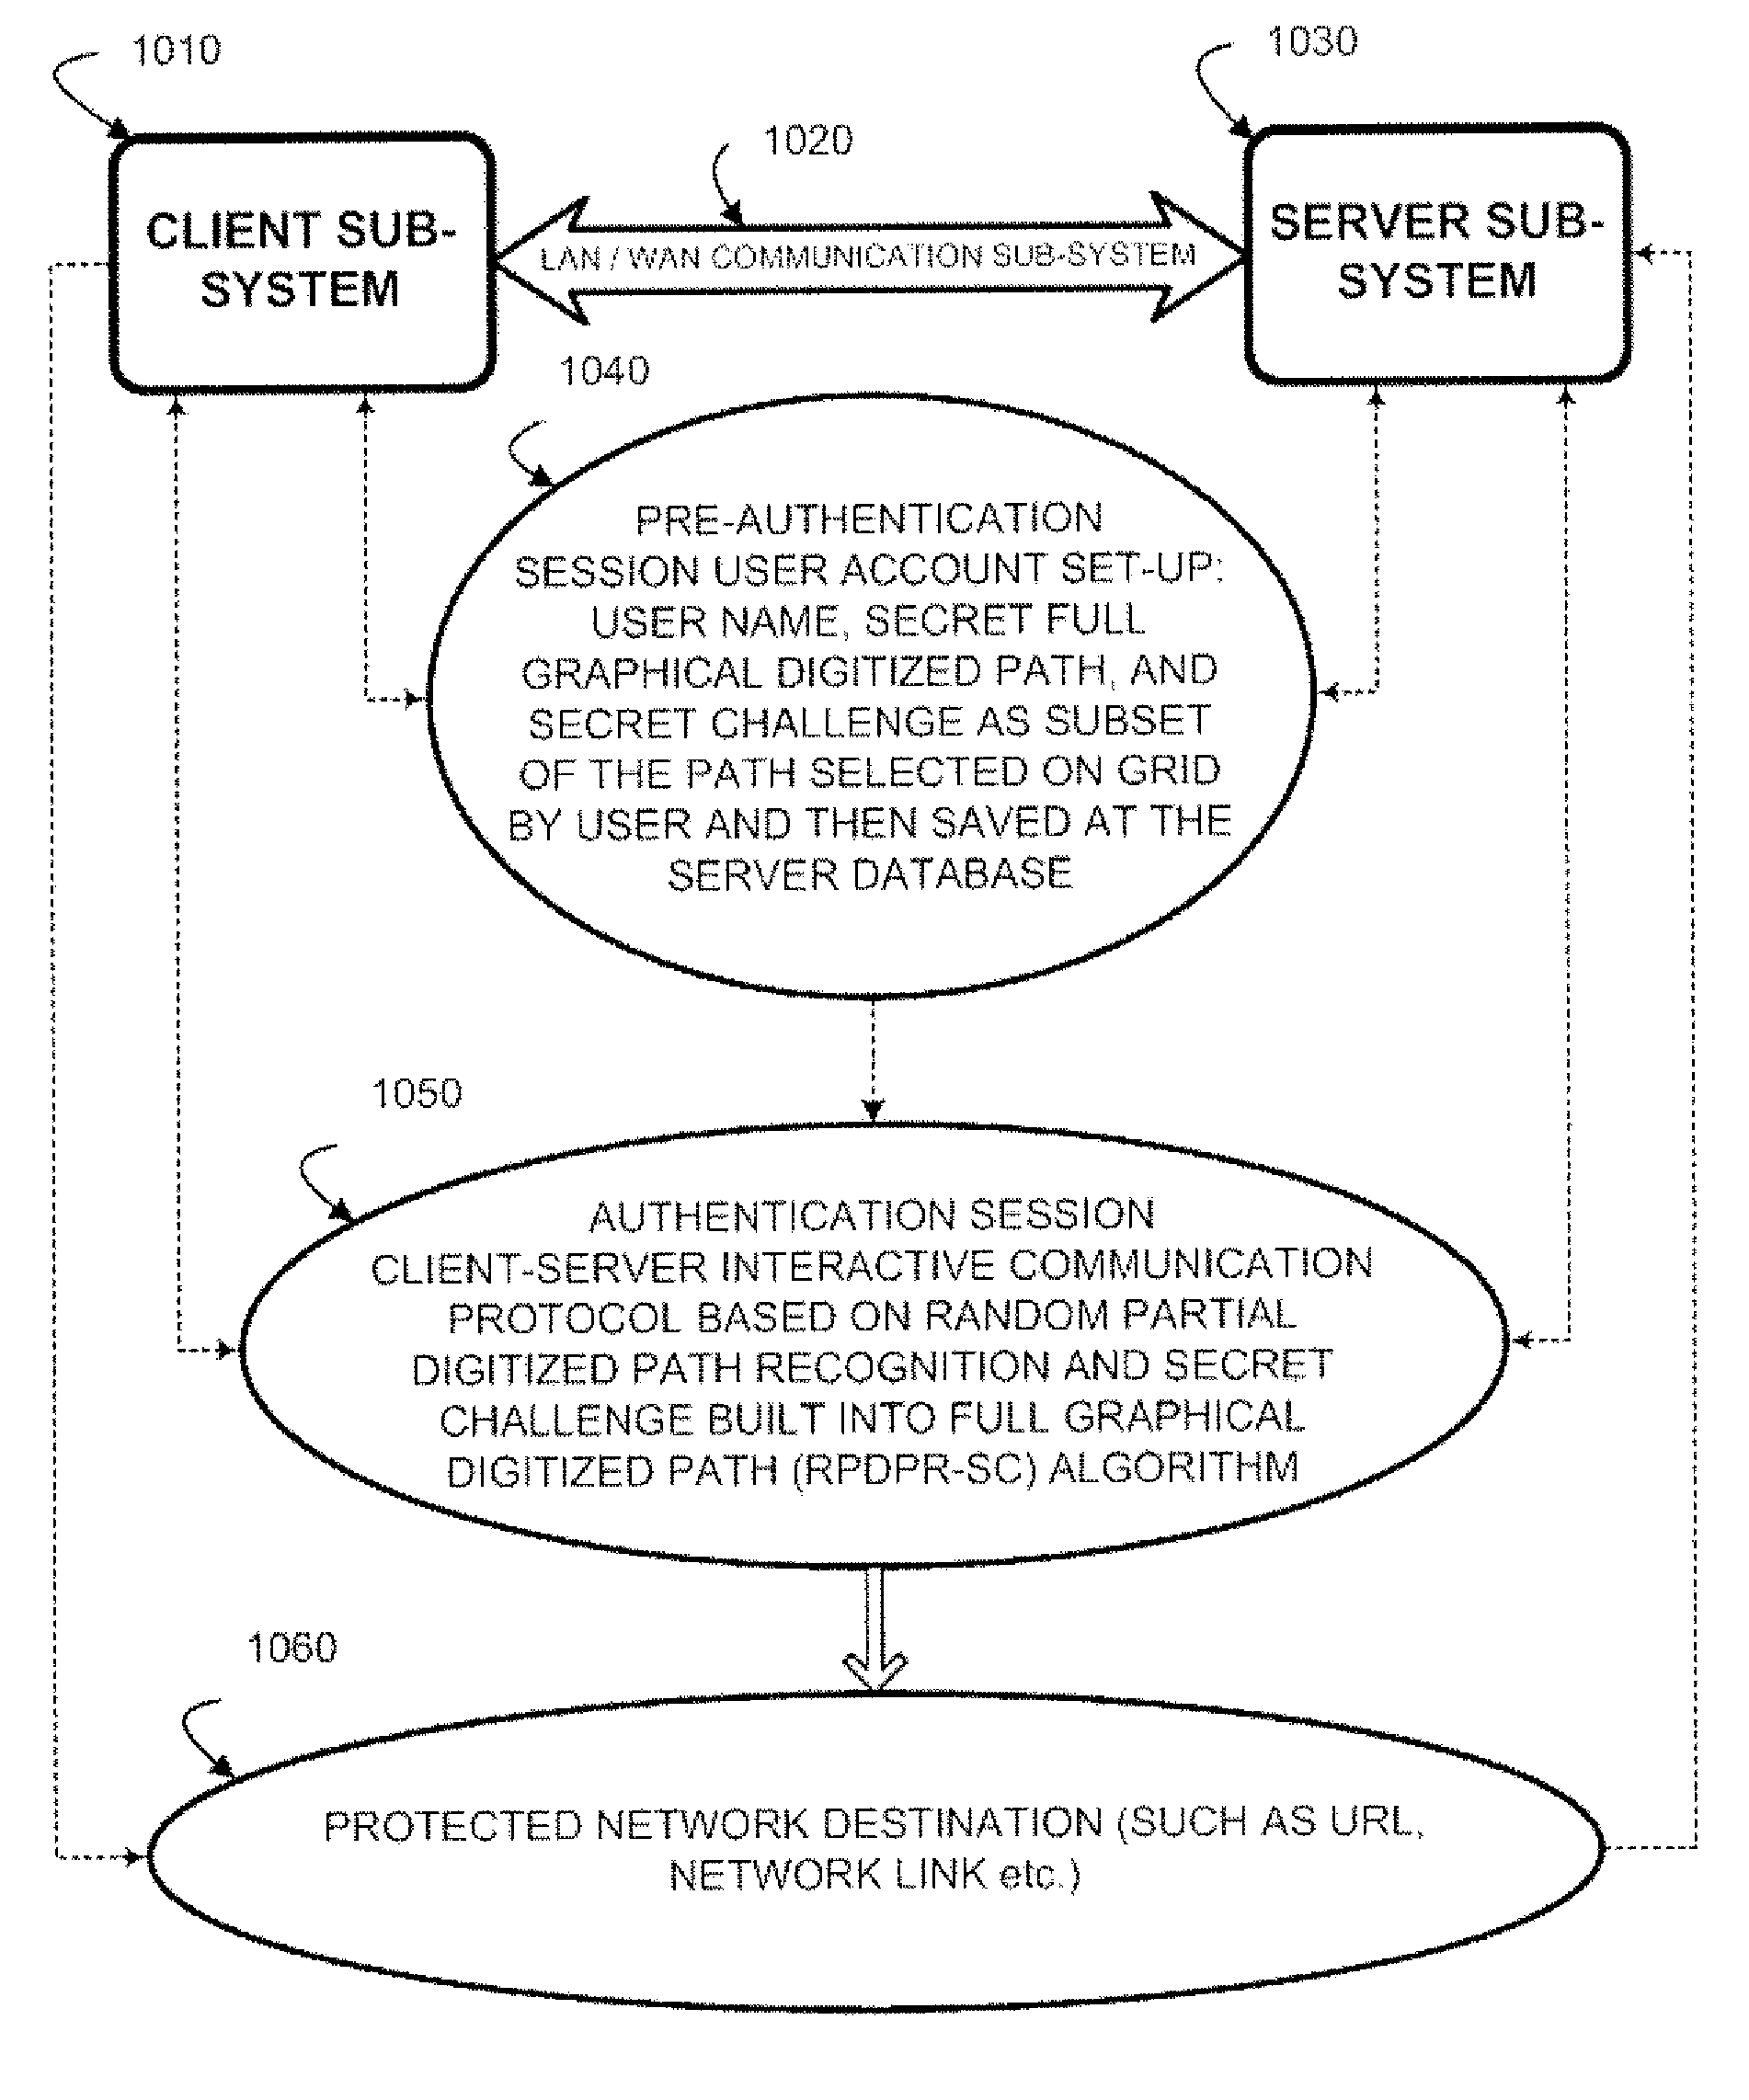 Authentication method of random partial digitized path recognition with a challenge built into the path